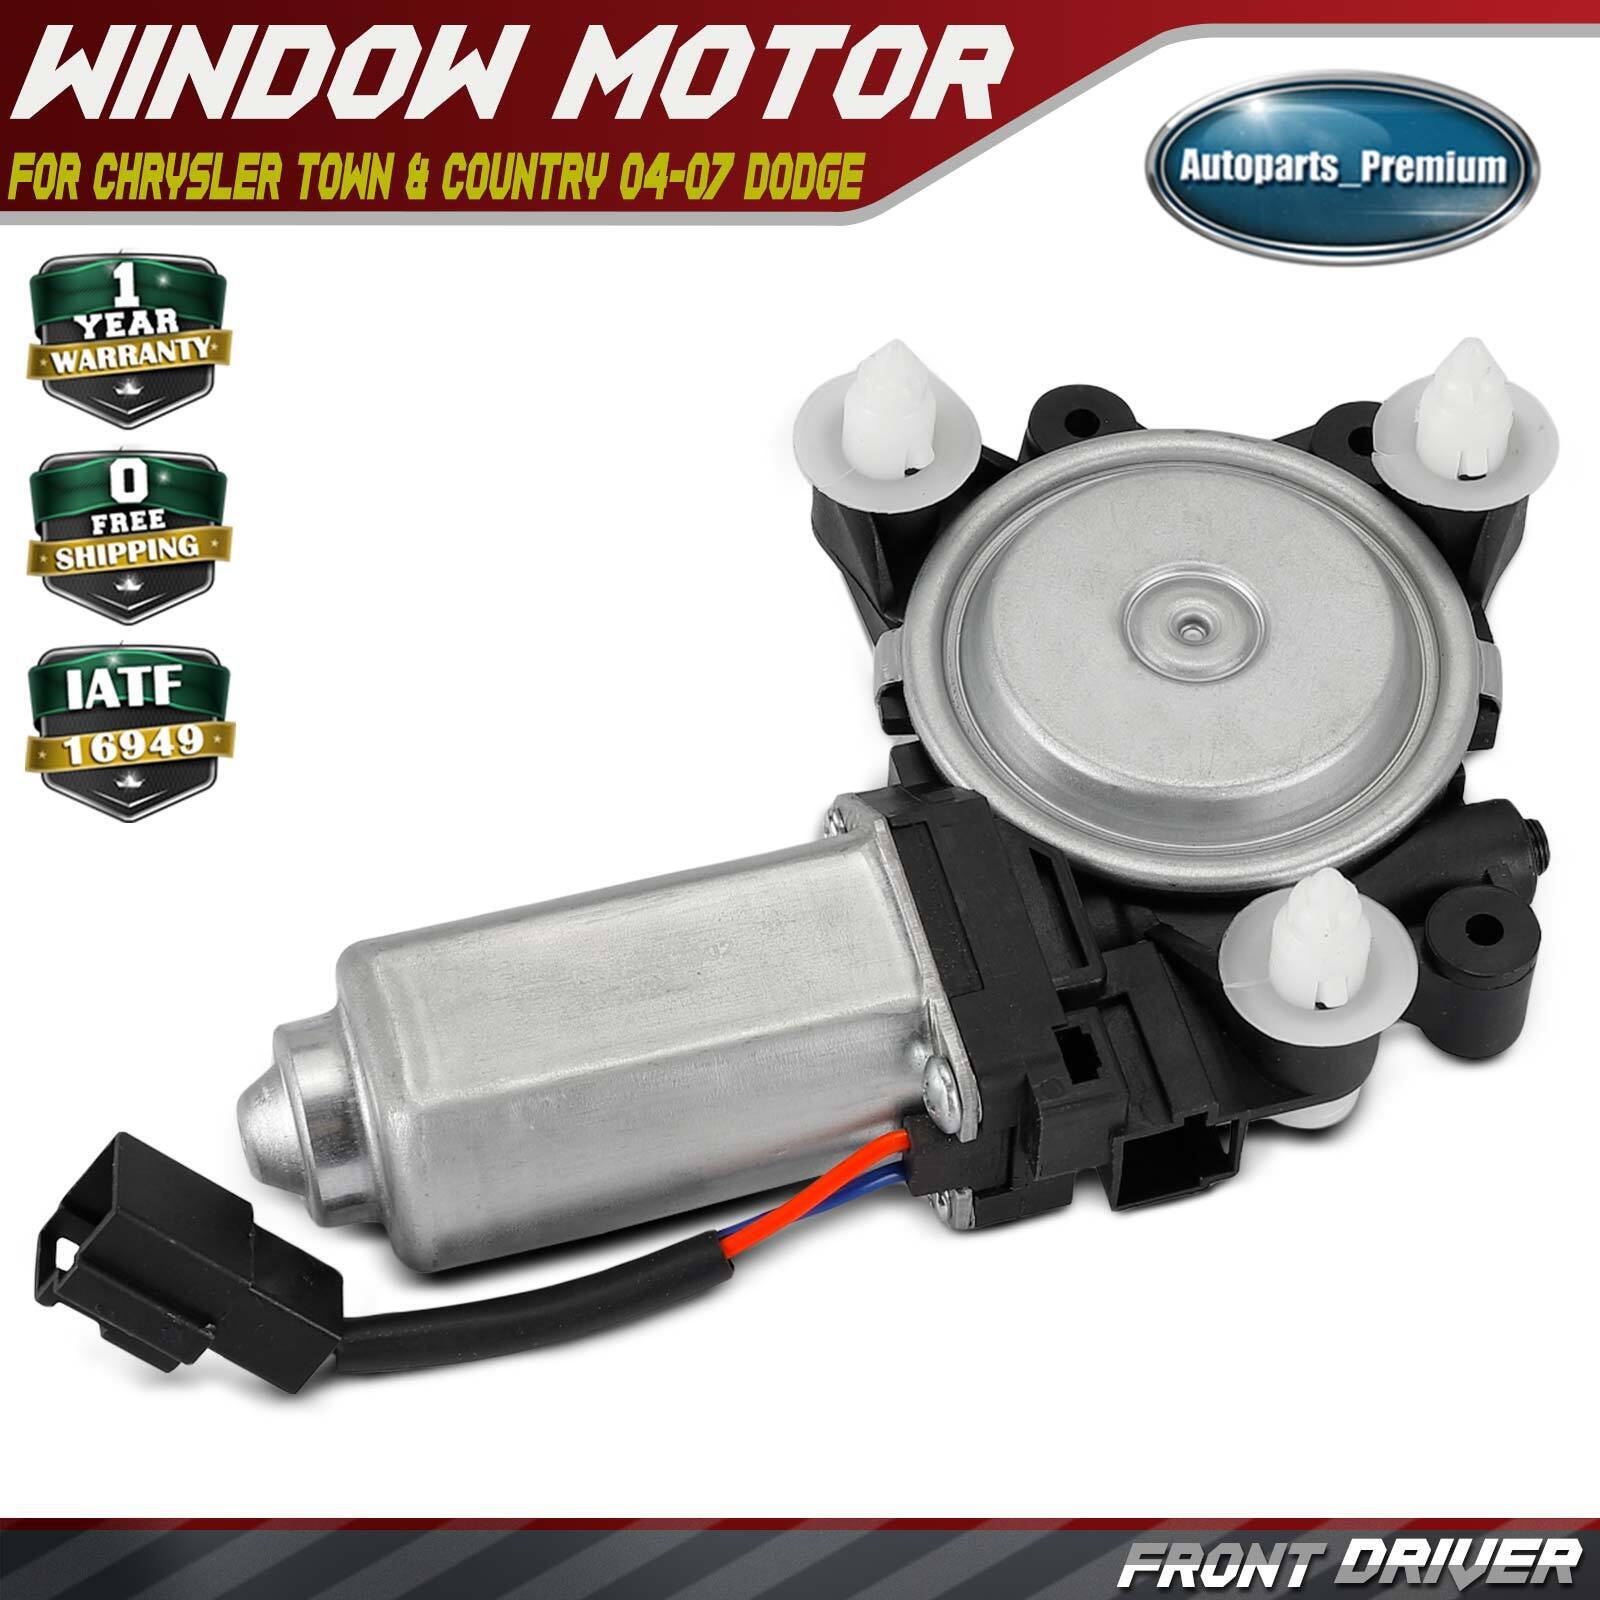 Front Left Power Window Motor w/ 2-Pins for Chrysler Town & Country 04-07 Dodge